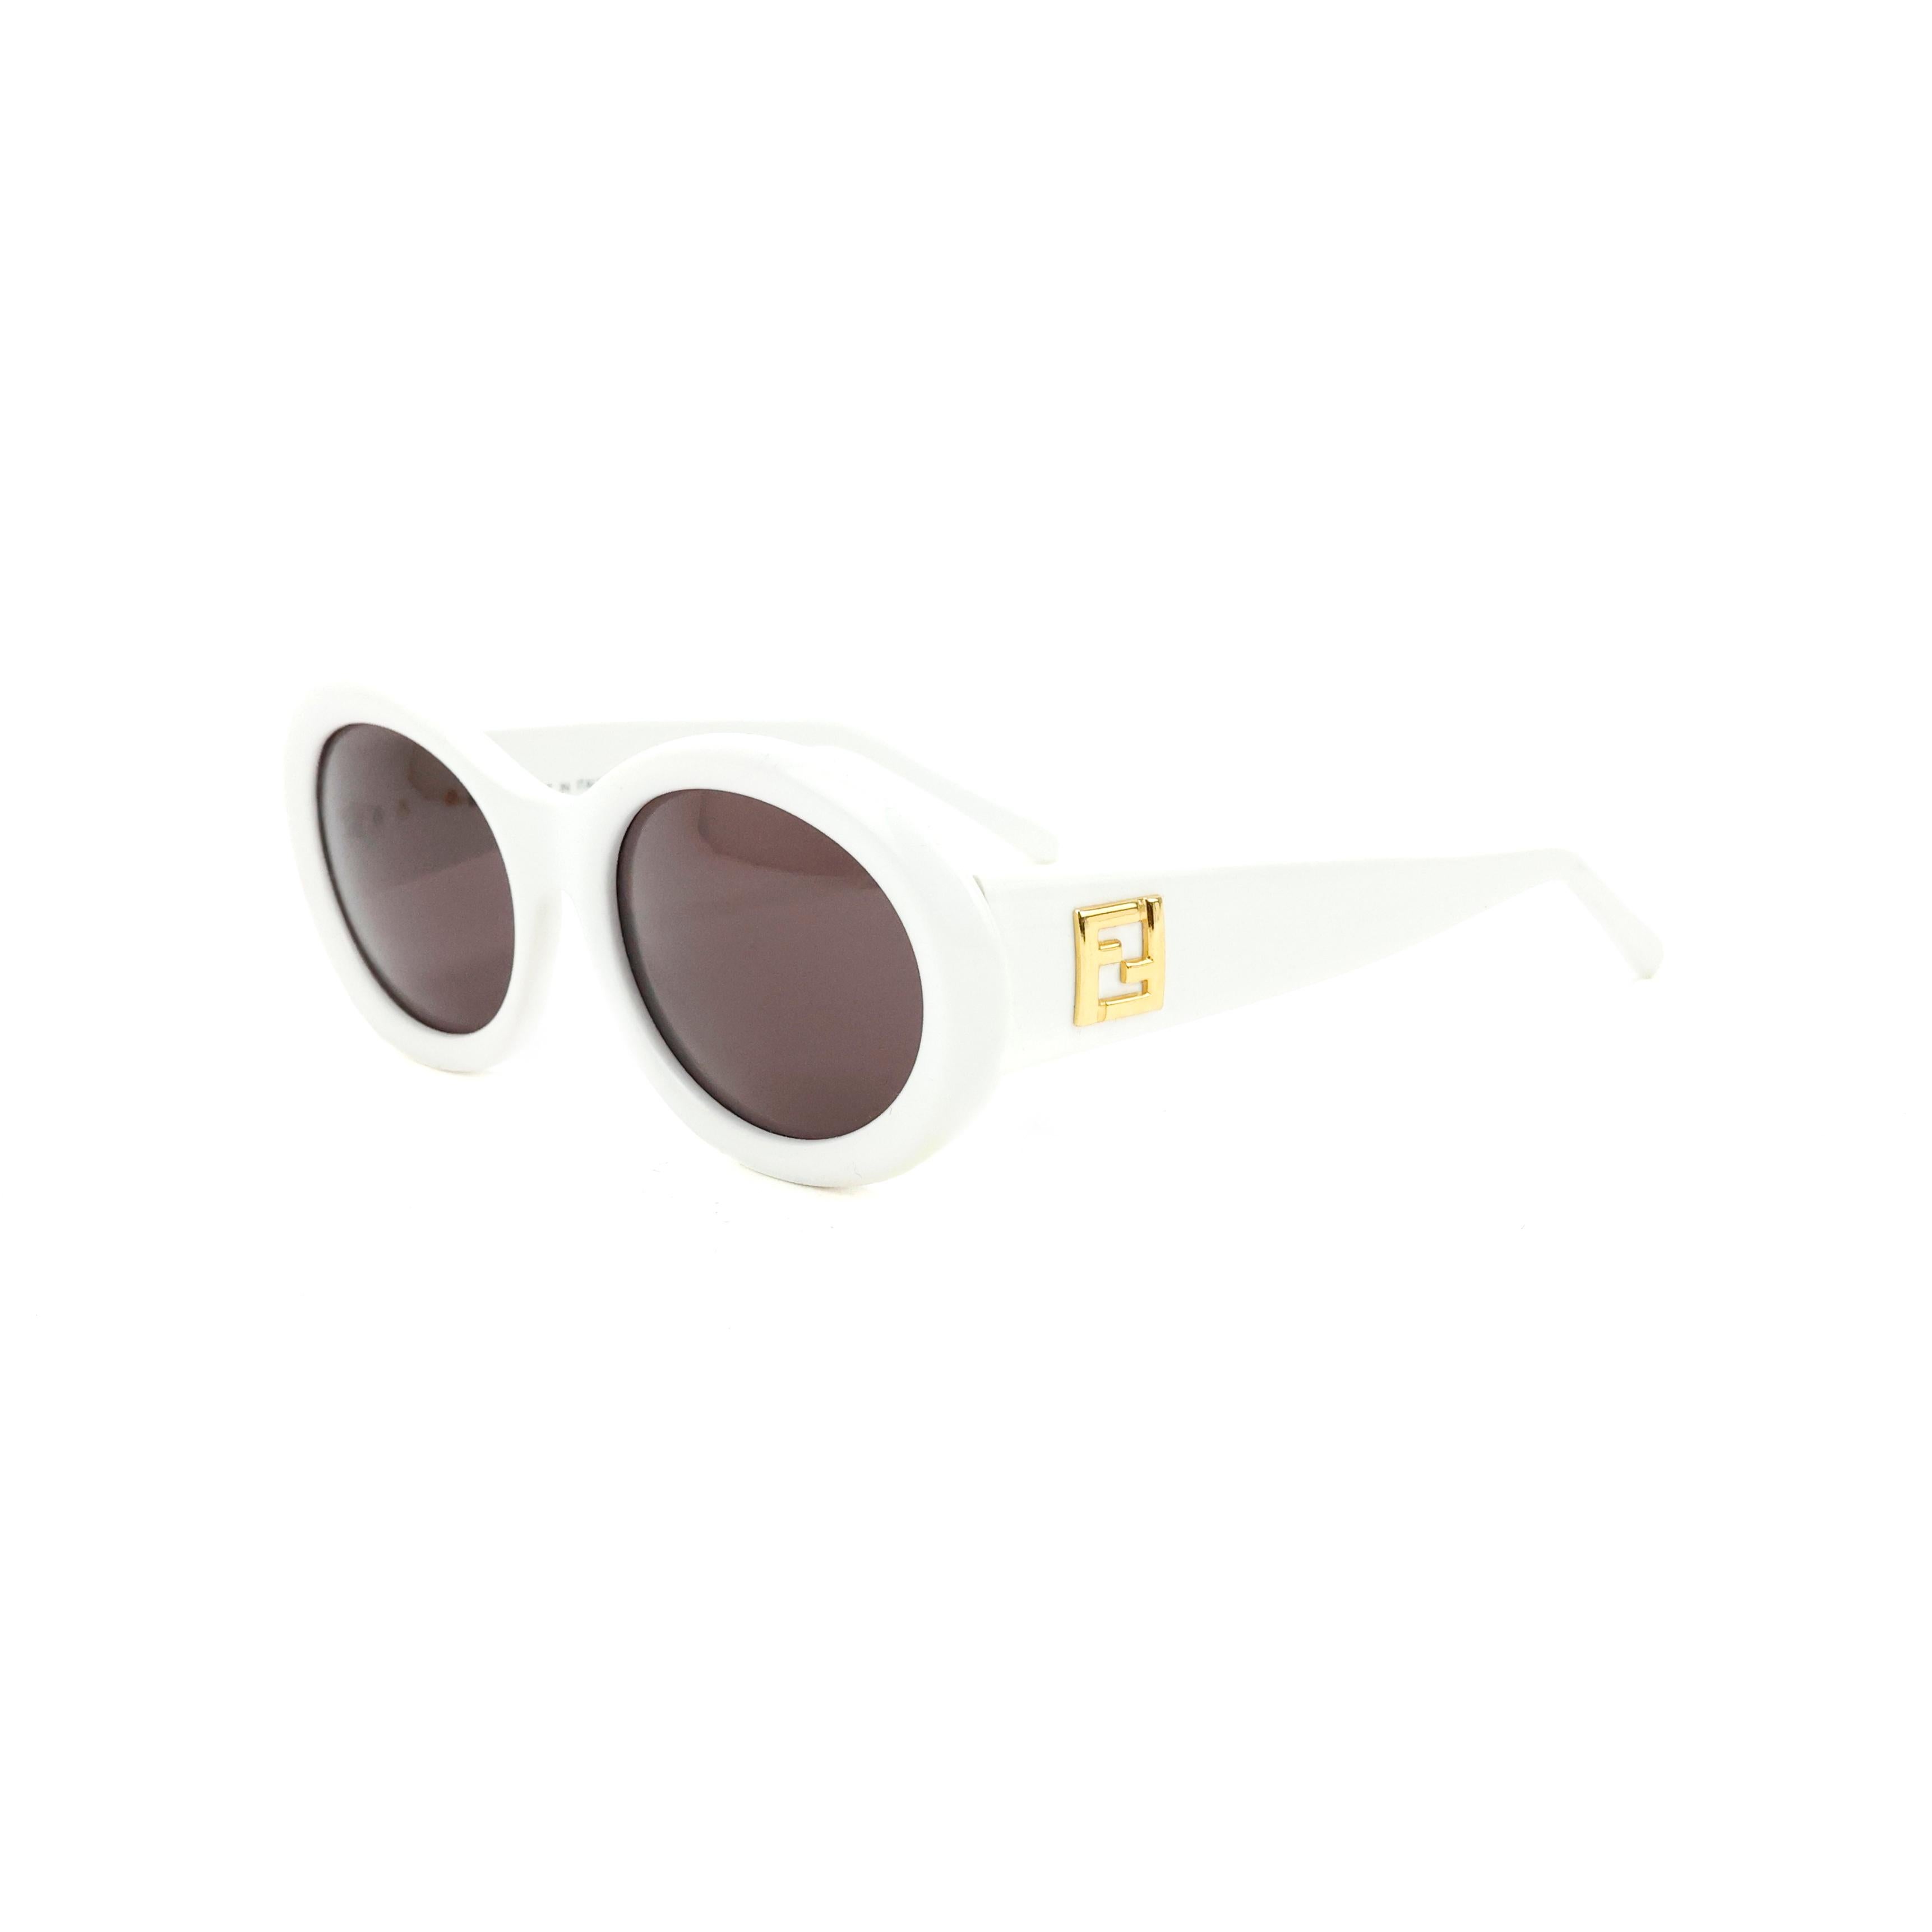 Fendi sunglasses Kurt Cobain style color white with gold colored double F logo. 

Condition:
Really good.

Packing/accessories:
Case.